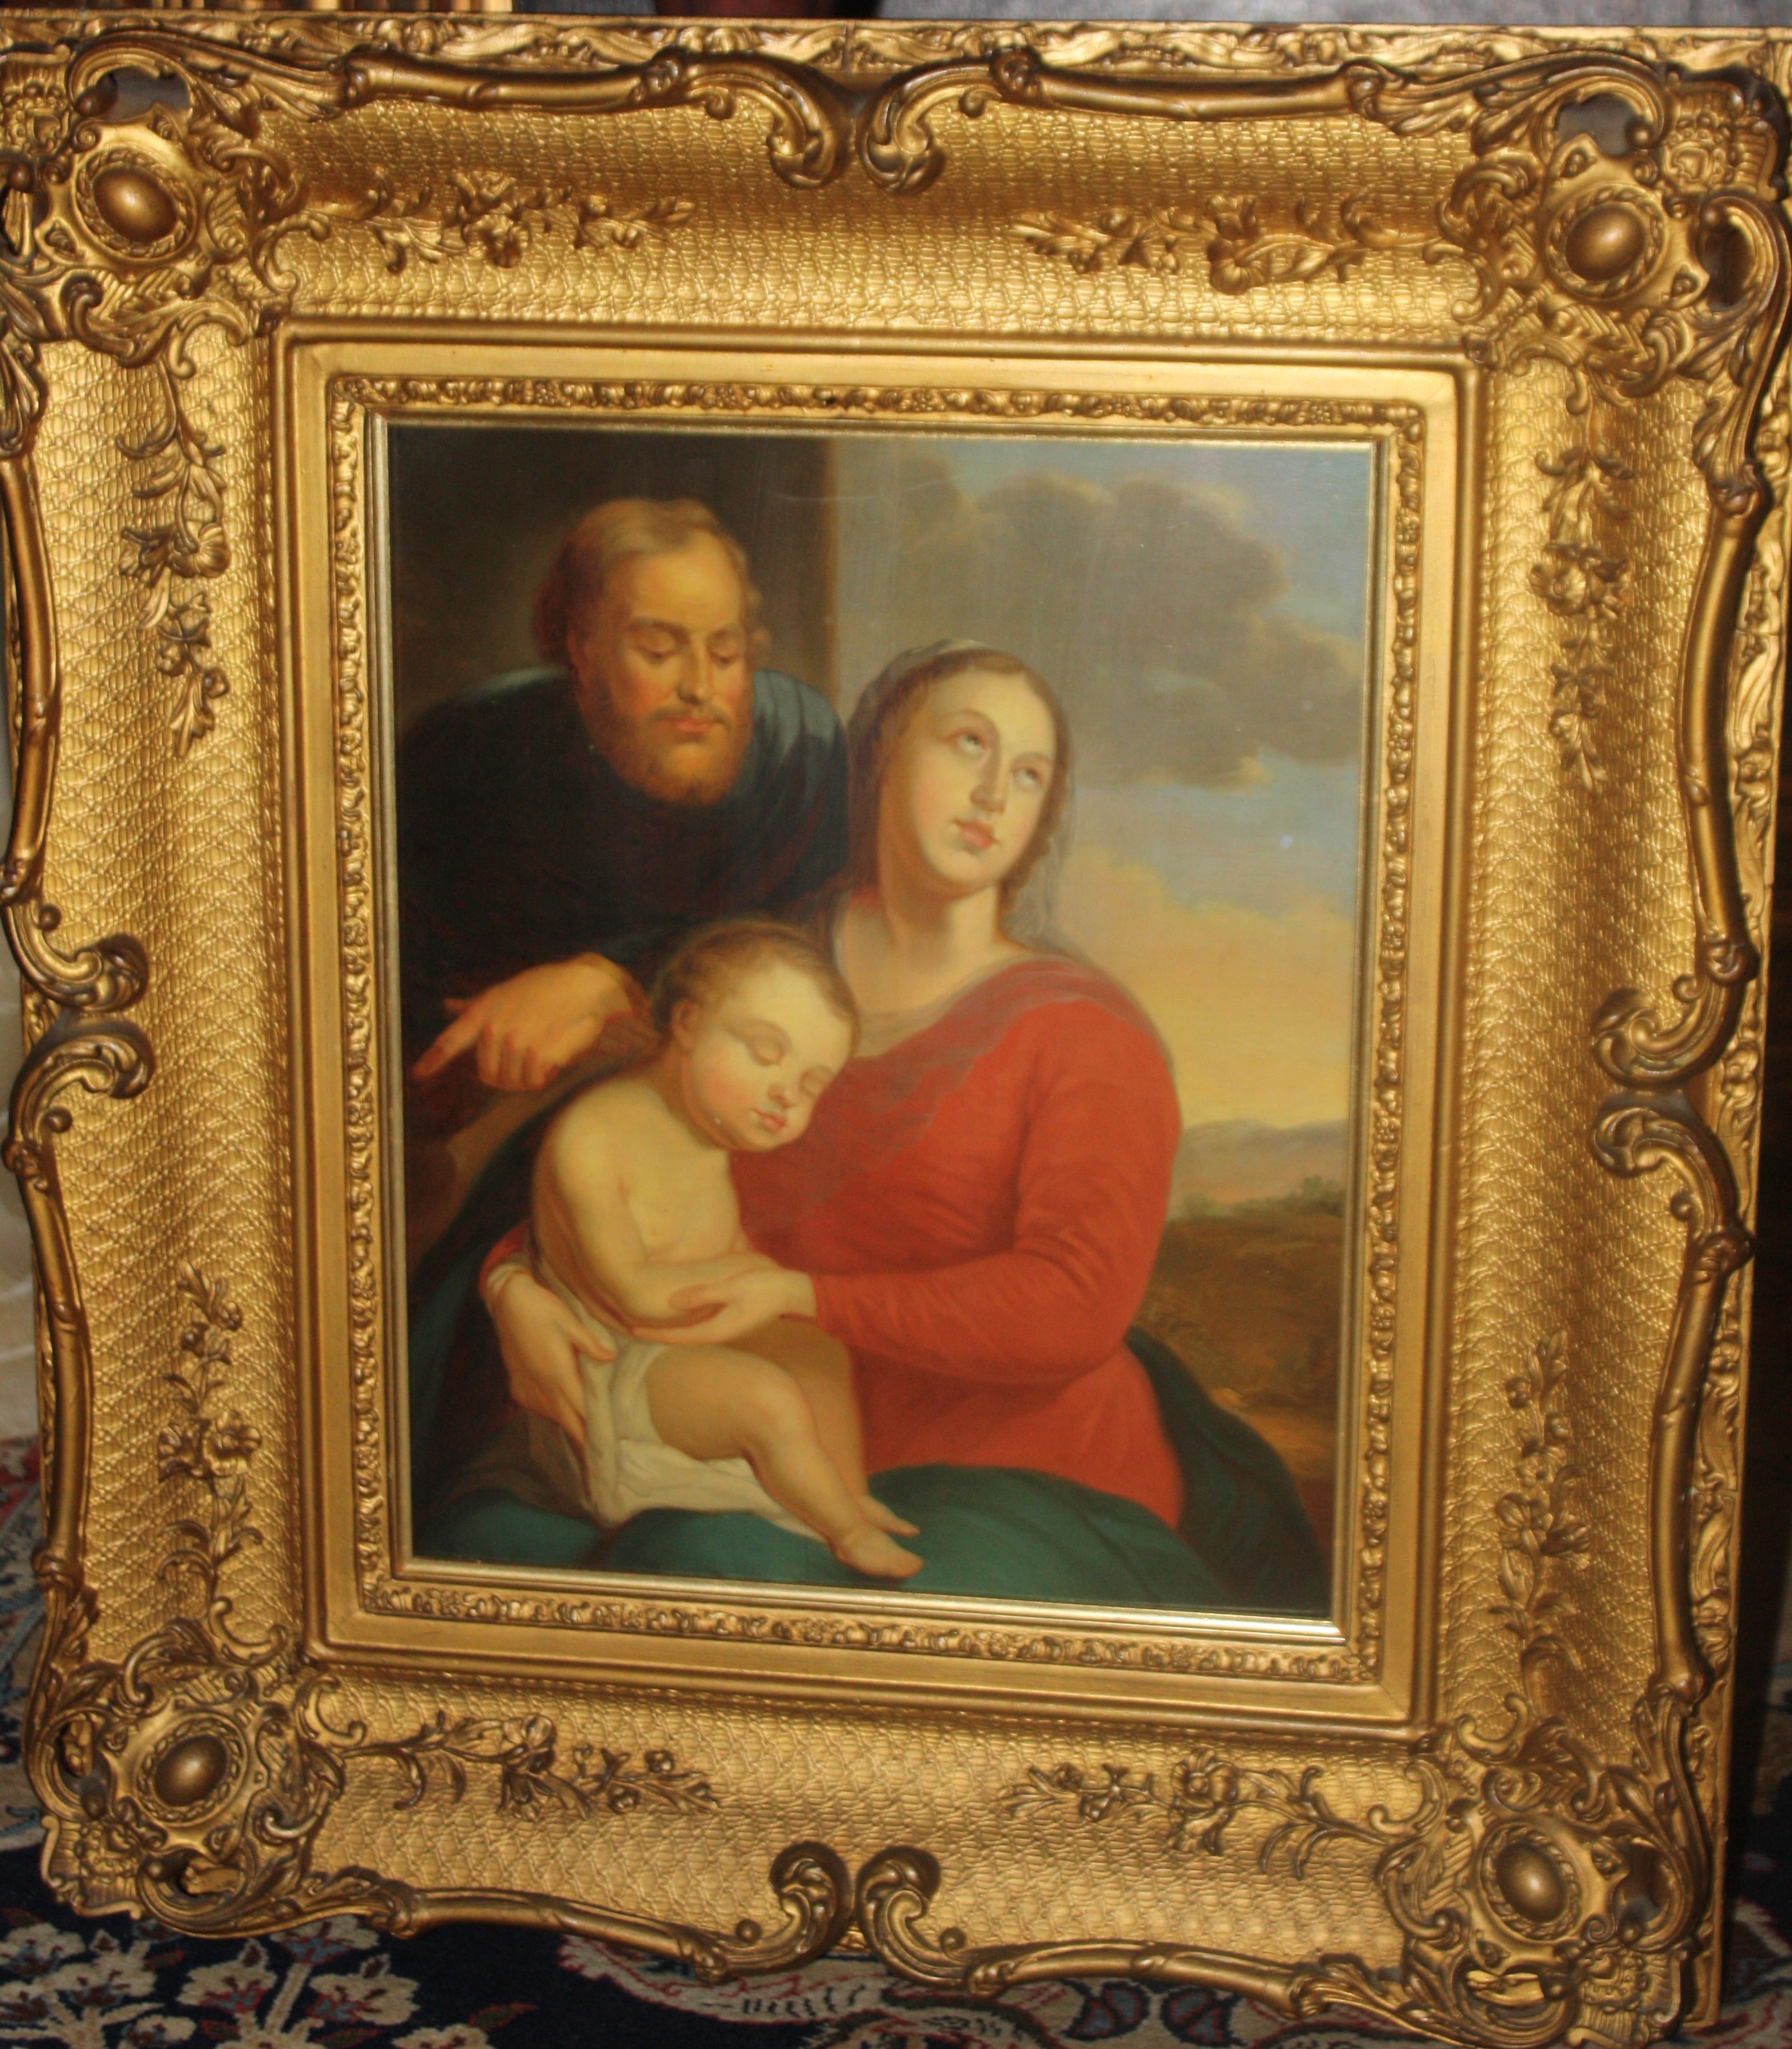 An Italian 19th century oil painting of the holy family